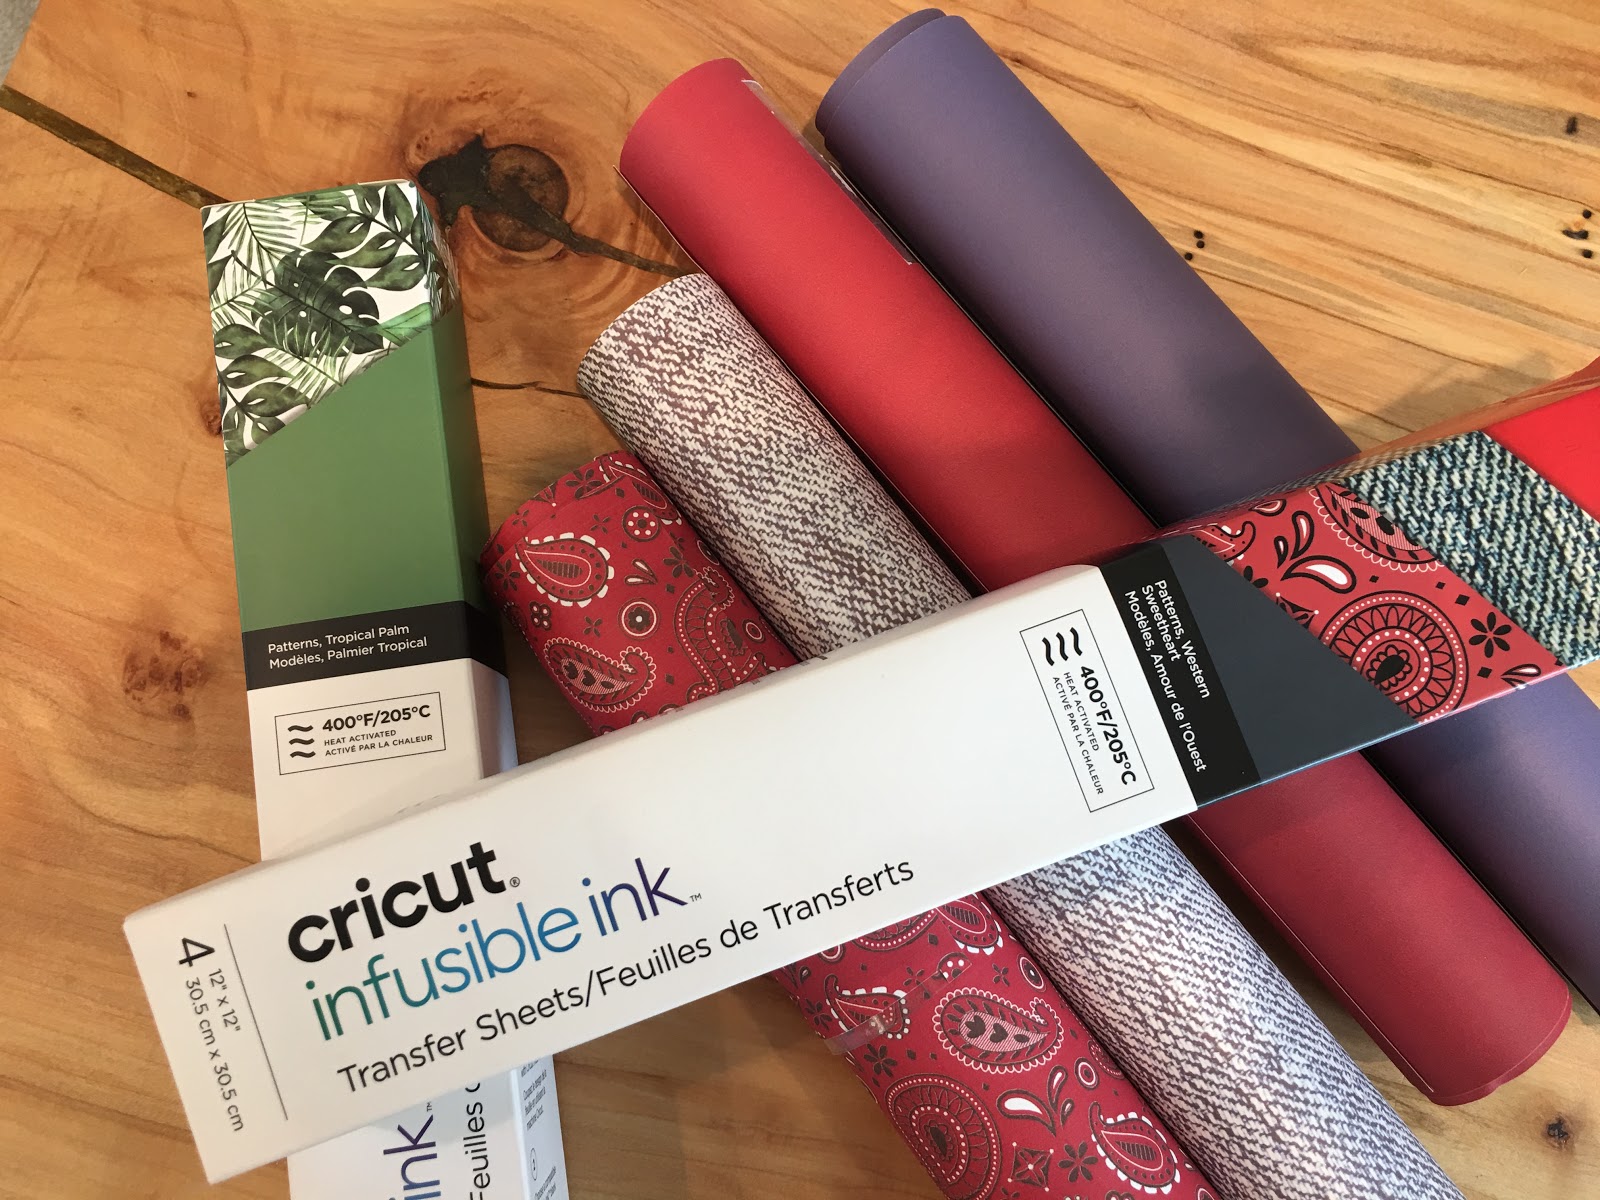 Infusible Ink Pens with the Brother ScanNCut - Conquer Your Cricut, Cameo &  ScanNCut Confusion!